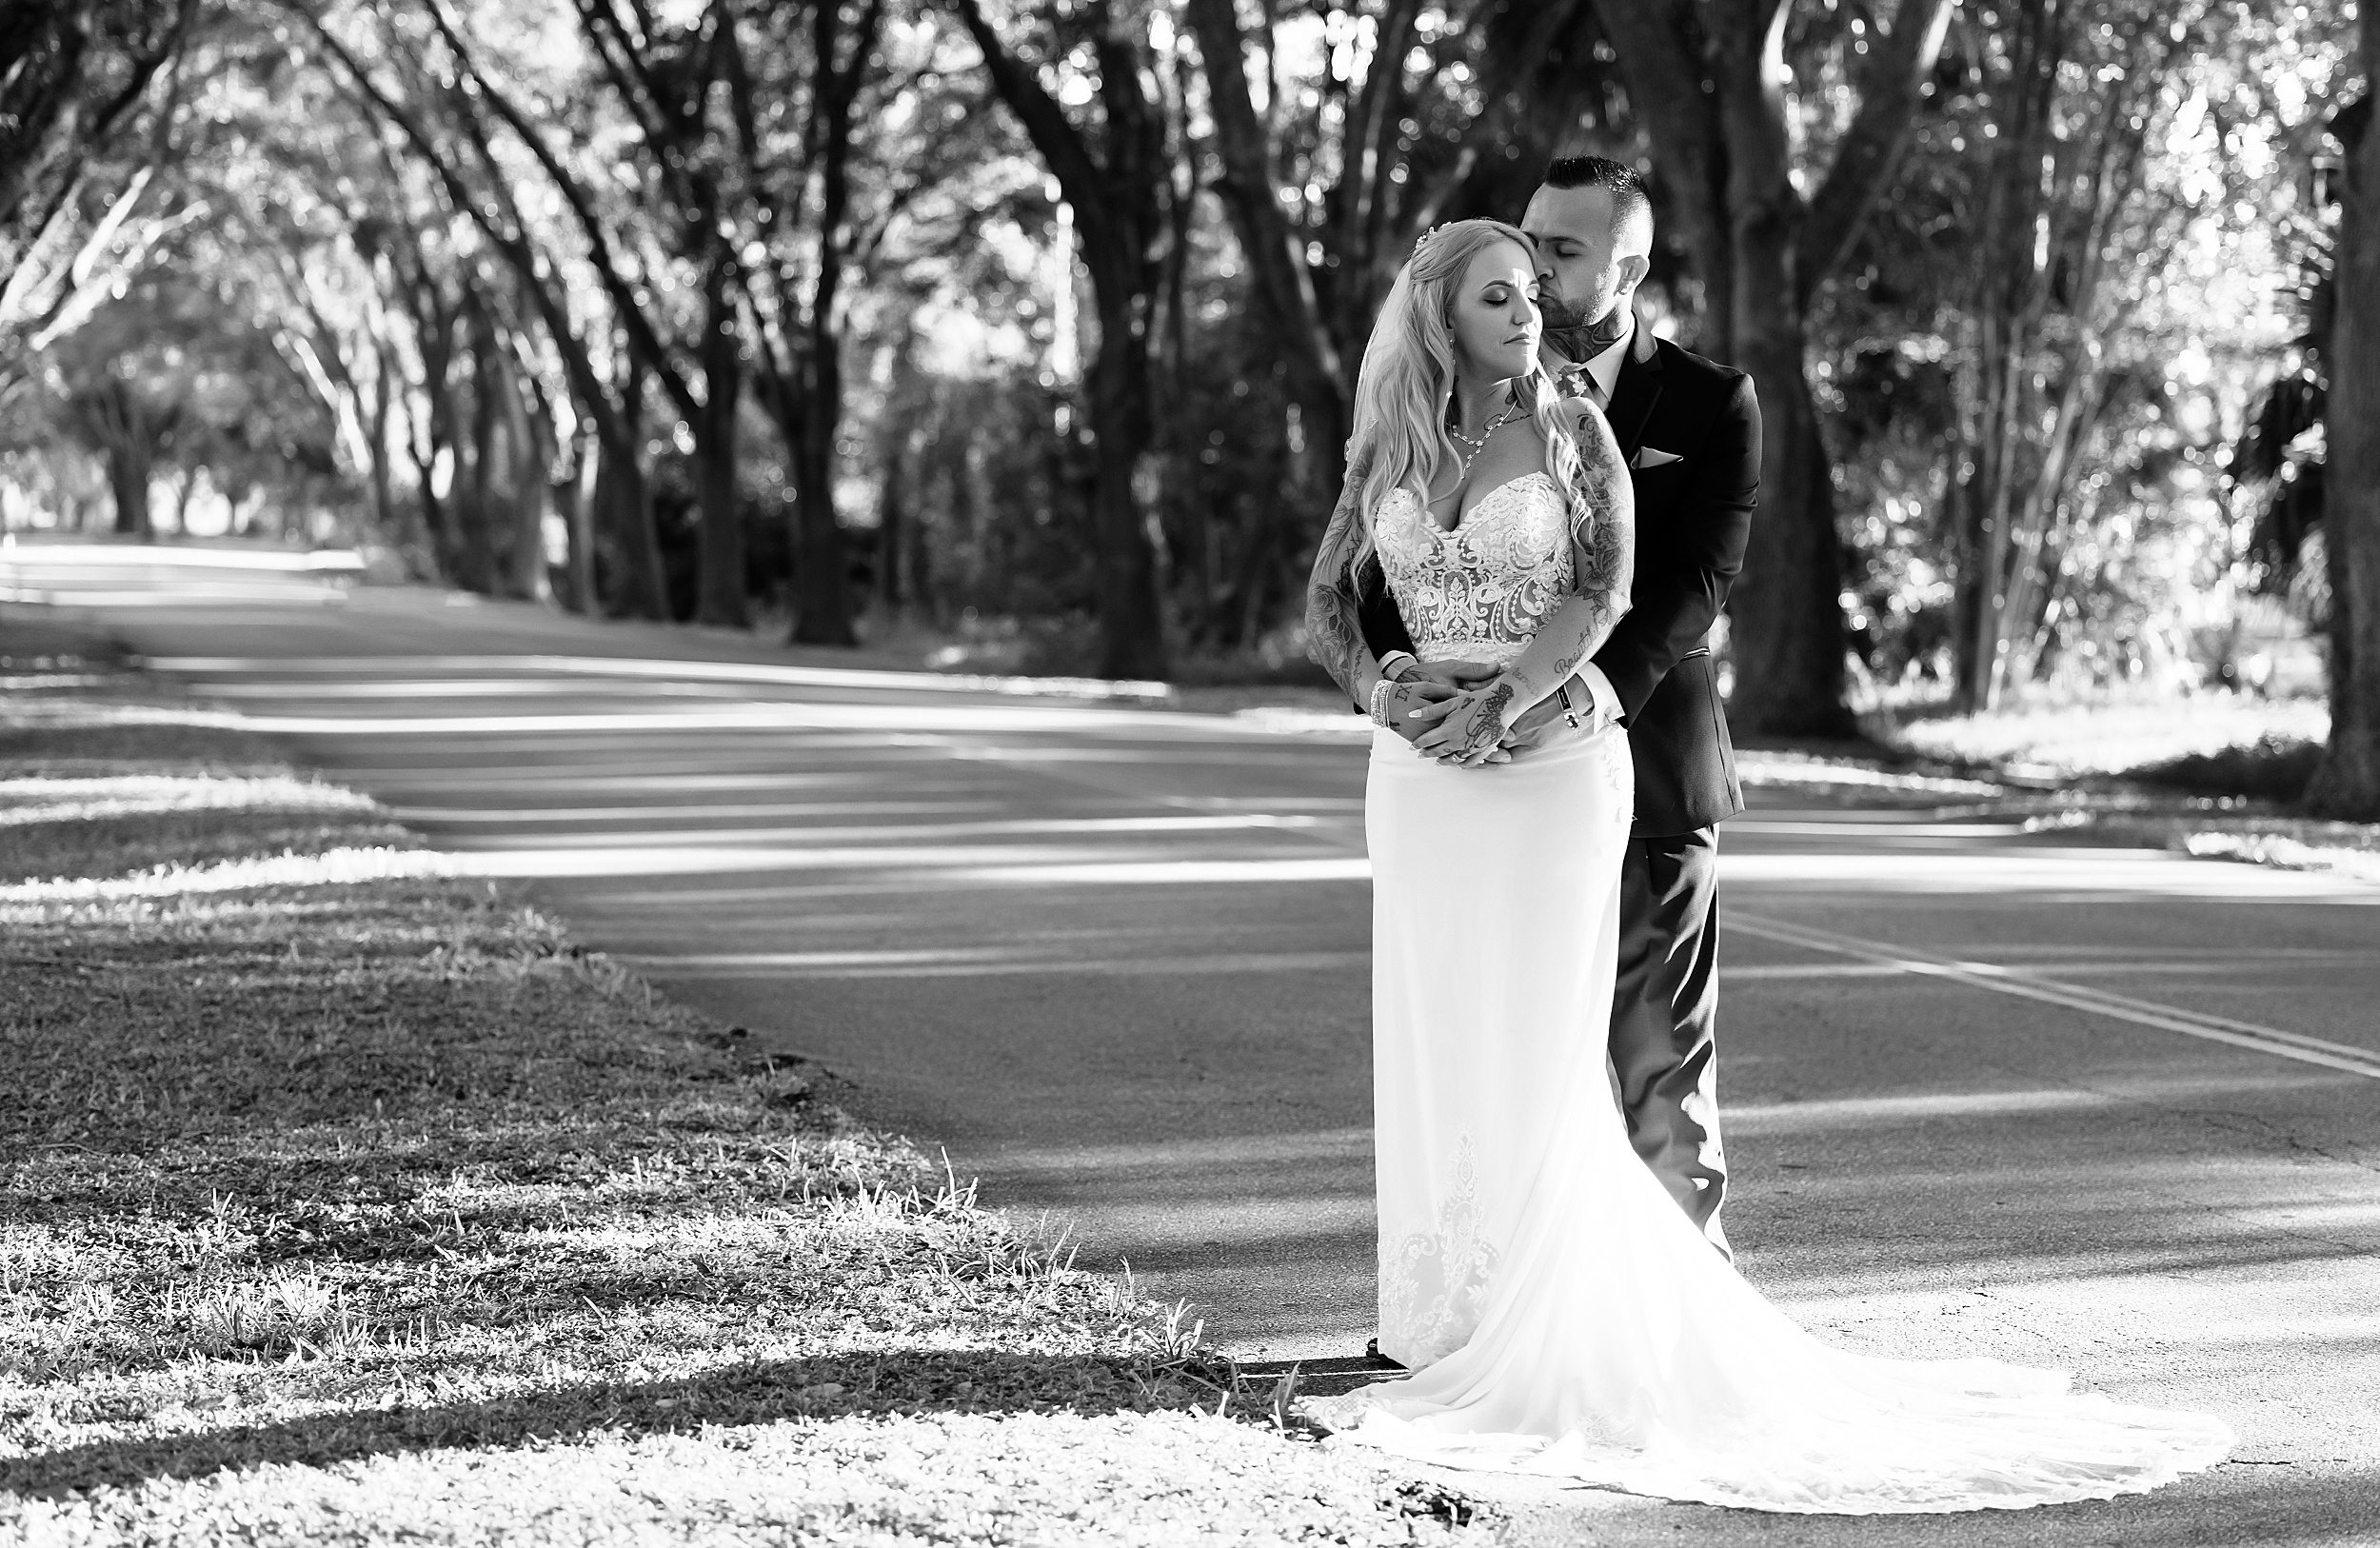 Newlyweds share an intimate moment under a line of oak trees